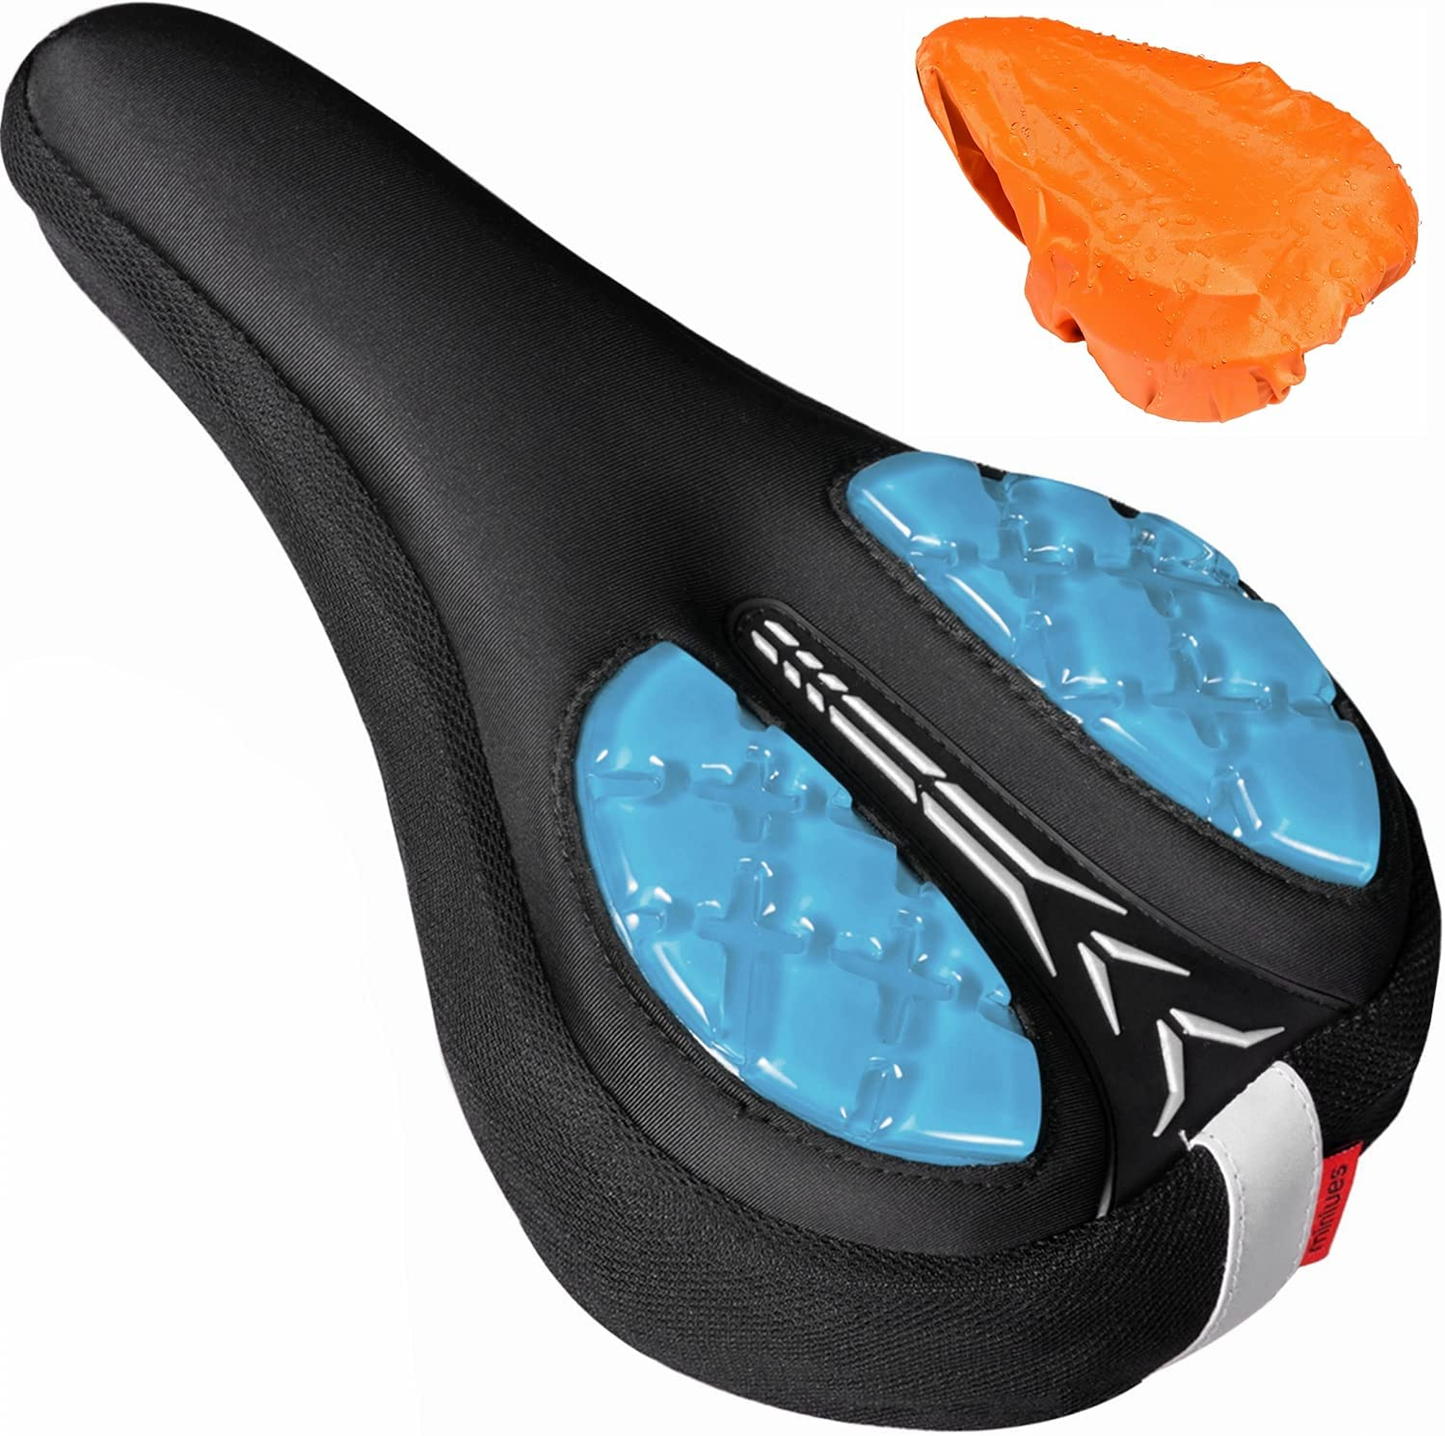 Gel Bike Seat Cover - Soft Silicone Cushion Comfortable Exercise Bicycle Saddle Replacement for Mountain Road, Gym or Toddler Bike Compatible with Spin Bike, Indoor Outdoor Cycling